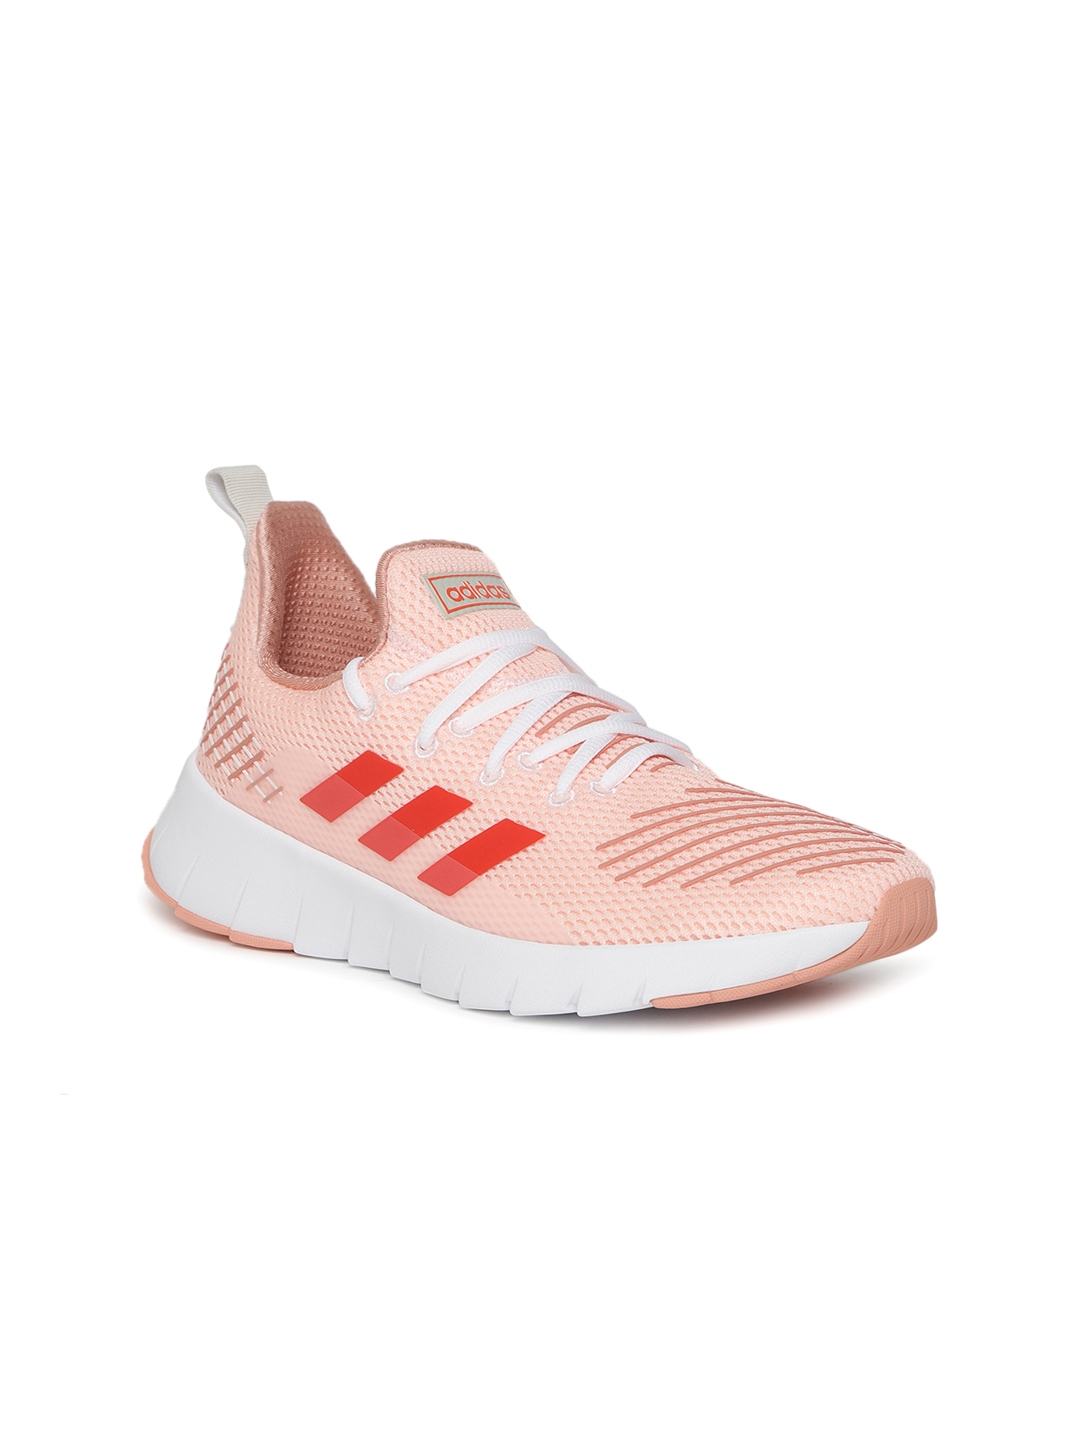 Buy ADIDAS Men Peach Coloured Asweego Running Shoes - Sports Shoes for ...